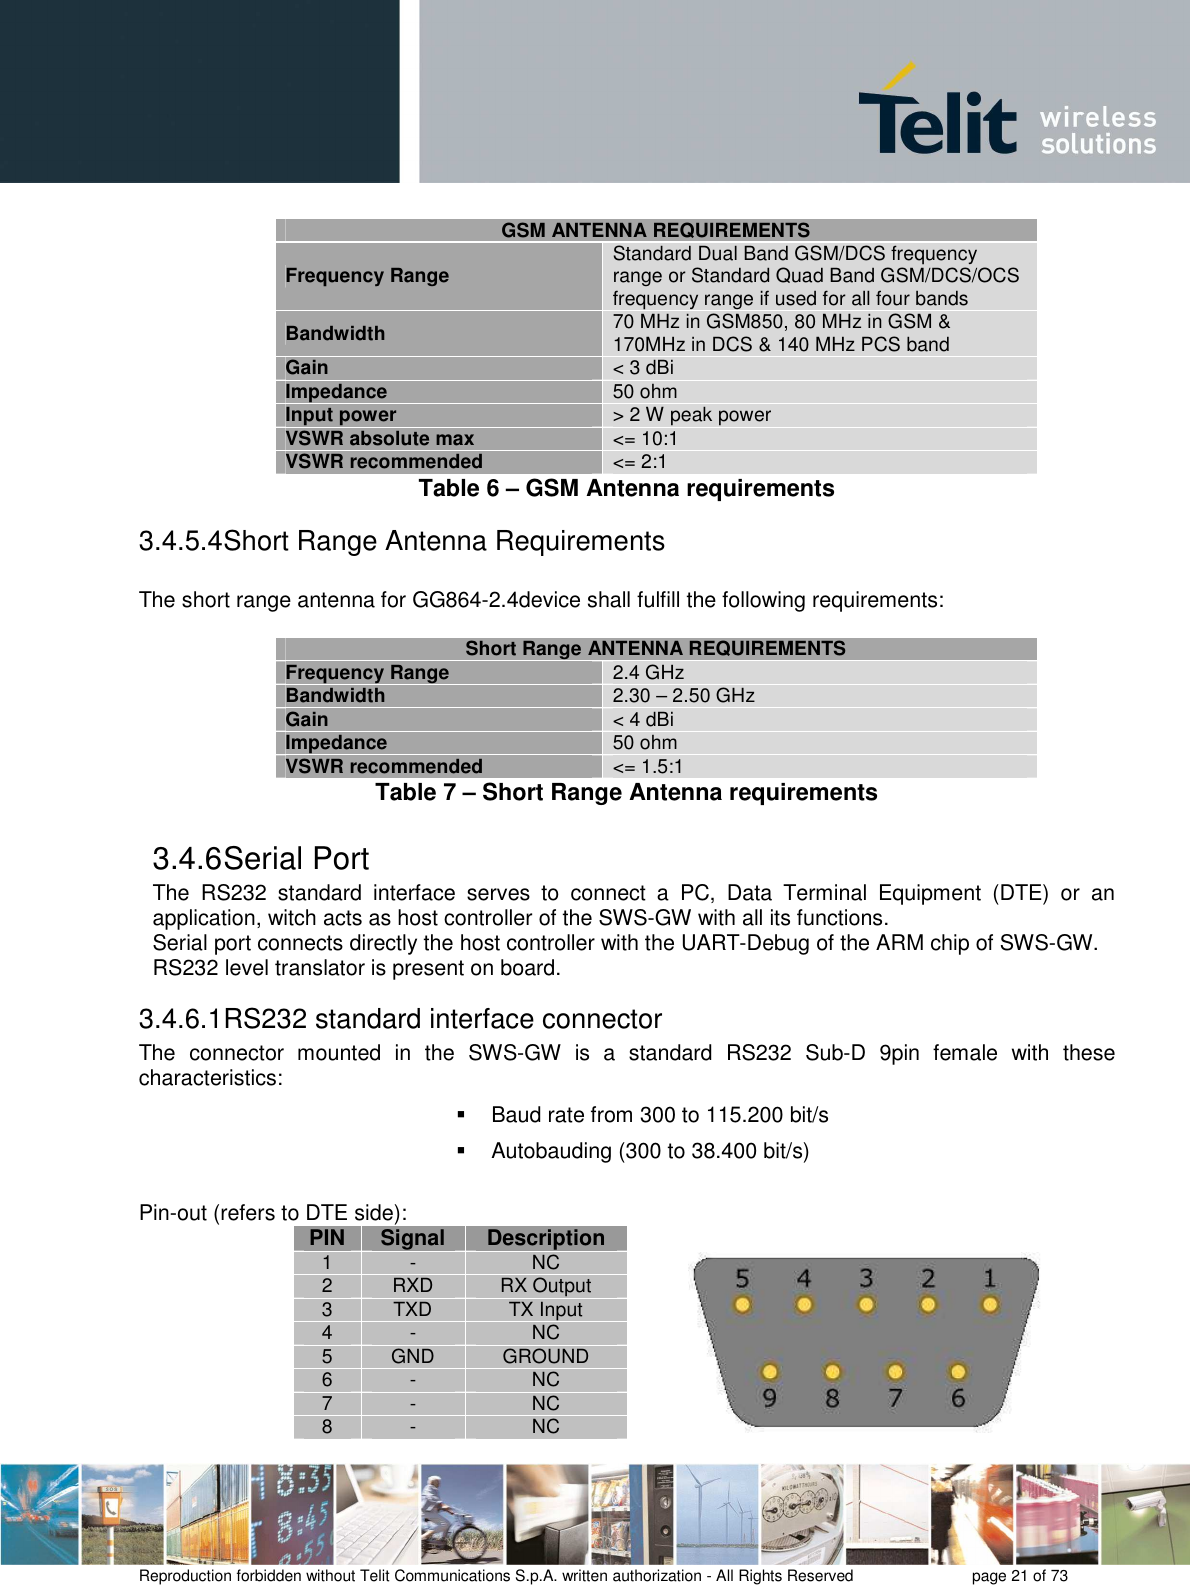       Reproduction forbidden without Telit Communications S.p.A. written authorization - All Rights Reserved    page 21 of 73  GSM ANTENNA REQUIREMENTS Frequency Range Standard Dual Band GSM/DCS frequency range or Standard Quad Band GSM/DCS/OCS frequency range if used for all four bands  Bandwidth 70 MHz in GSM850, 80 MHz in GSM &amp; 170MHz in DCS &amp; 140 MHz PCS band  Gain &lt; 3 dBi Impedance 50 ohm Input power &gt; 2 W peak power VSWR absolute max &lt;= 10:1 VSWR recommended &lt;= 2:1 Table 6 – GSM Antenna requirements 3.4.5.4 Short Range Antenna Requirements  The short range antenna for GG864-2.4device shall fulfill the following requirements:  Short Range ANTENNA REQUIREMENTS Frequency Range 2.4 GHz  Bandwidth 2.30 – 2.50 GHz  Gain &lt; 4 dBi Impedance 50 ohm VSWR recommended &lt;= 1.5:1 Table 7 – Short Range Antenna requirements 3.4.6 Serial Port The  RS232  standard  interface  serves  to  connect  a  PC,  Data  Terminal  Equipment  (DTE)  or  an application, witch acts as host controller of the SWS-GW with all its functions. Serial port connects directly the host controller with the UART-Debug of the ARM chip of SWS-GW. RS232 level translator is present on board.  3.4.6.1 RS232 standard interface connector The  connector  mounted  in  the  SWS-GW  is  a  standard  RS232  Sub-D  9pin  female  with  these characteristics:   Baud rate from 300 to 115.200 bit/s   Autobauding (300 to 38.400 bit/s)  Pin-out (refers to DTE side): PIN  Signal Description 1  -  NC 2  RXD  RX Output 3  TXD  TX Input 4  -  NC 5  GND  GROUND 6  -  NC 7  -  NC 8  -  NC 